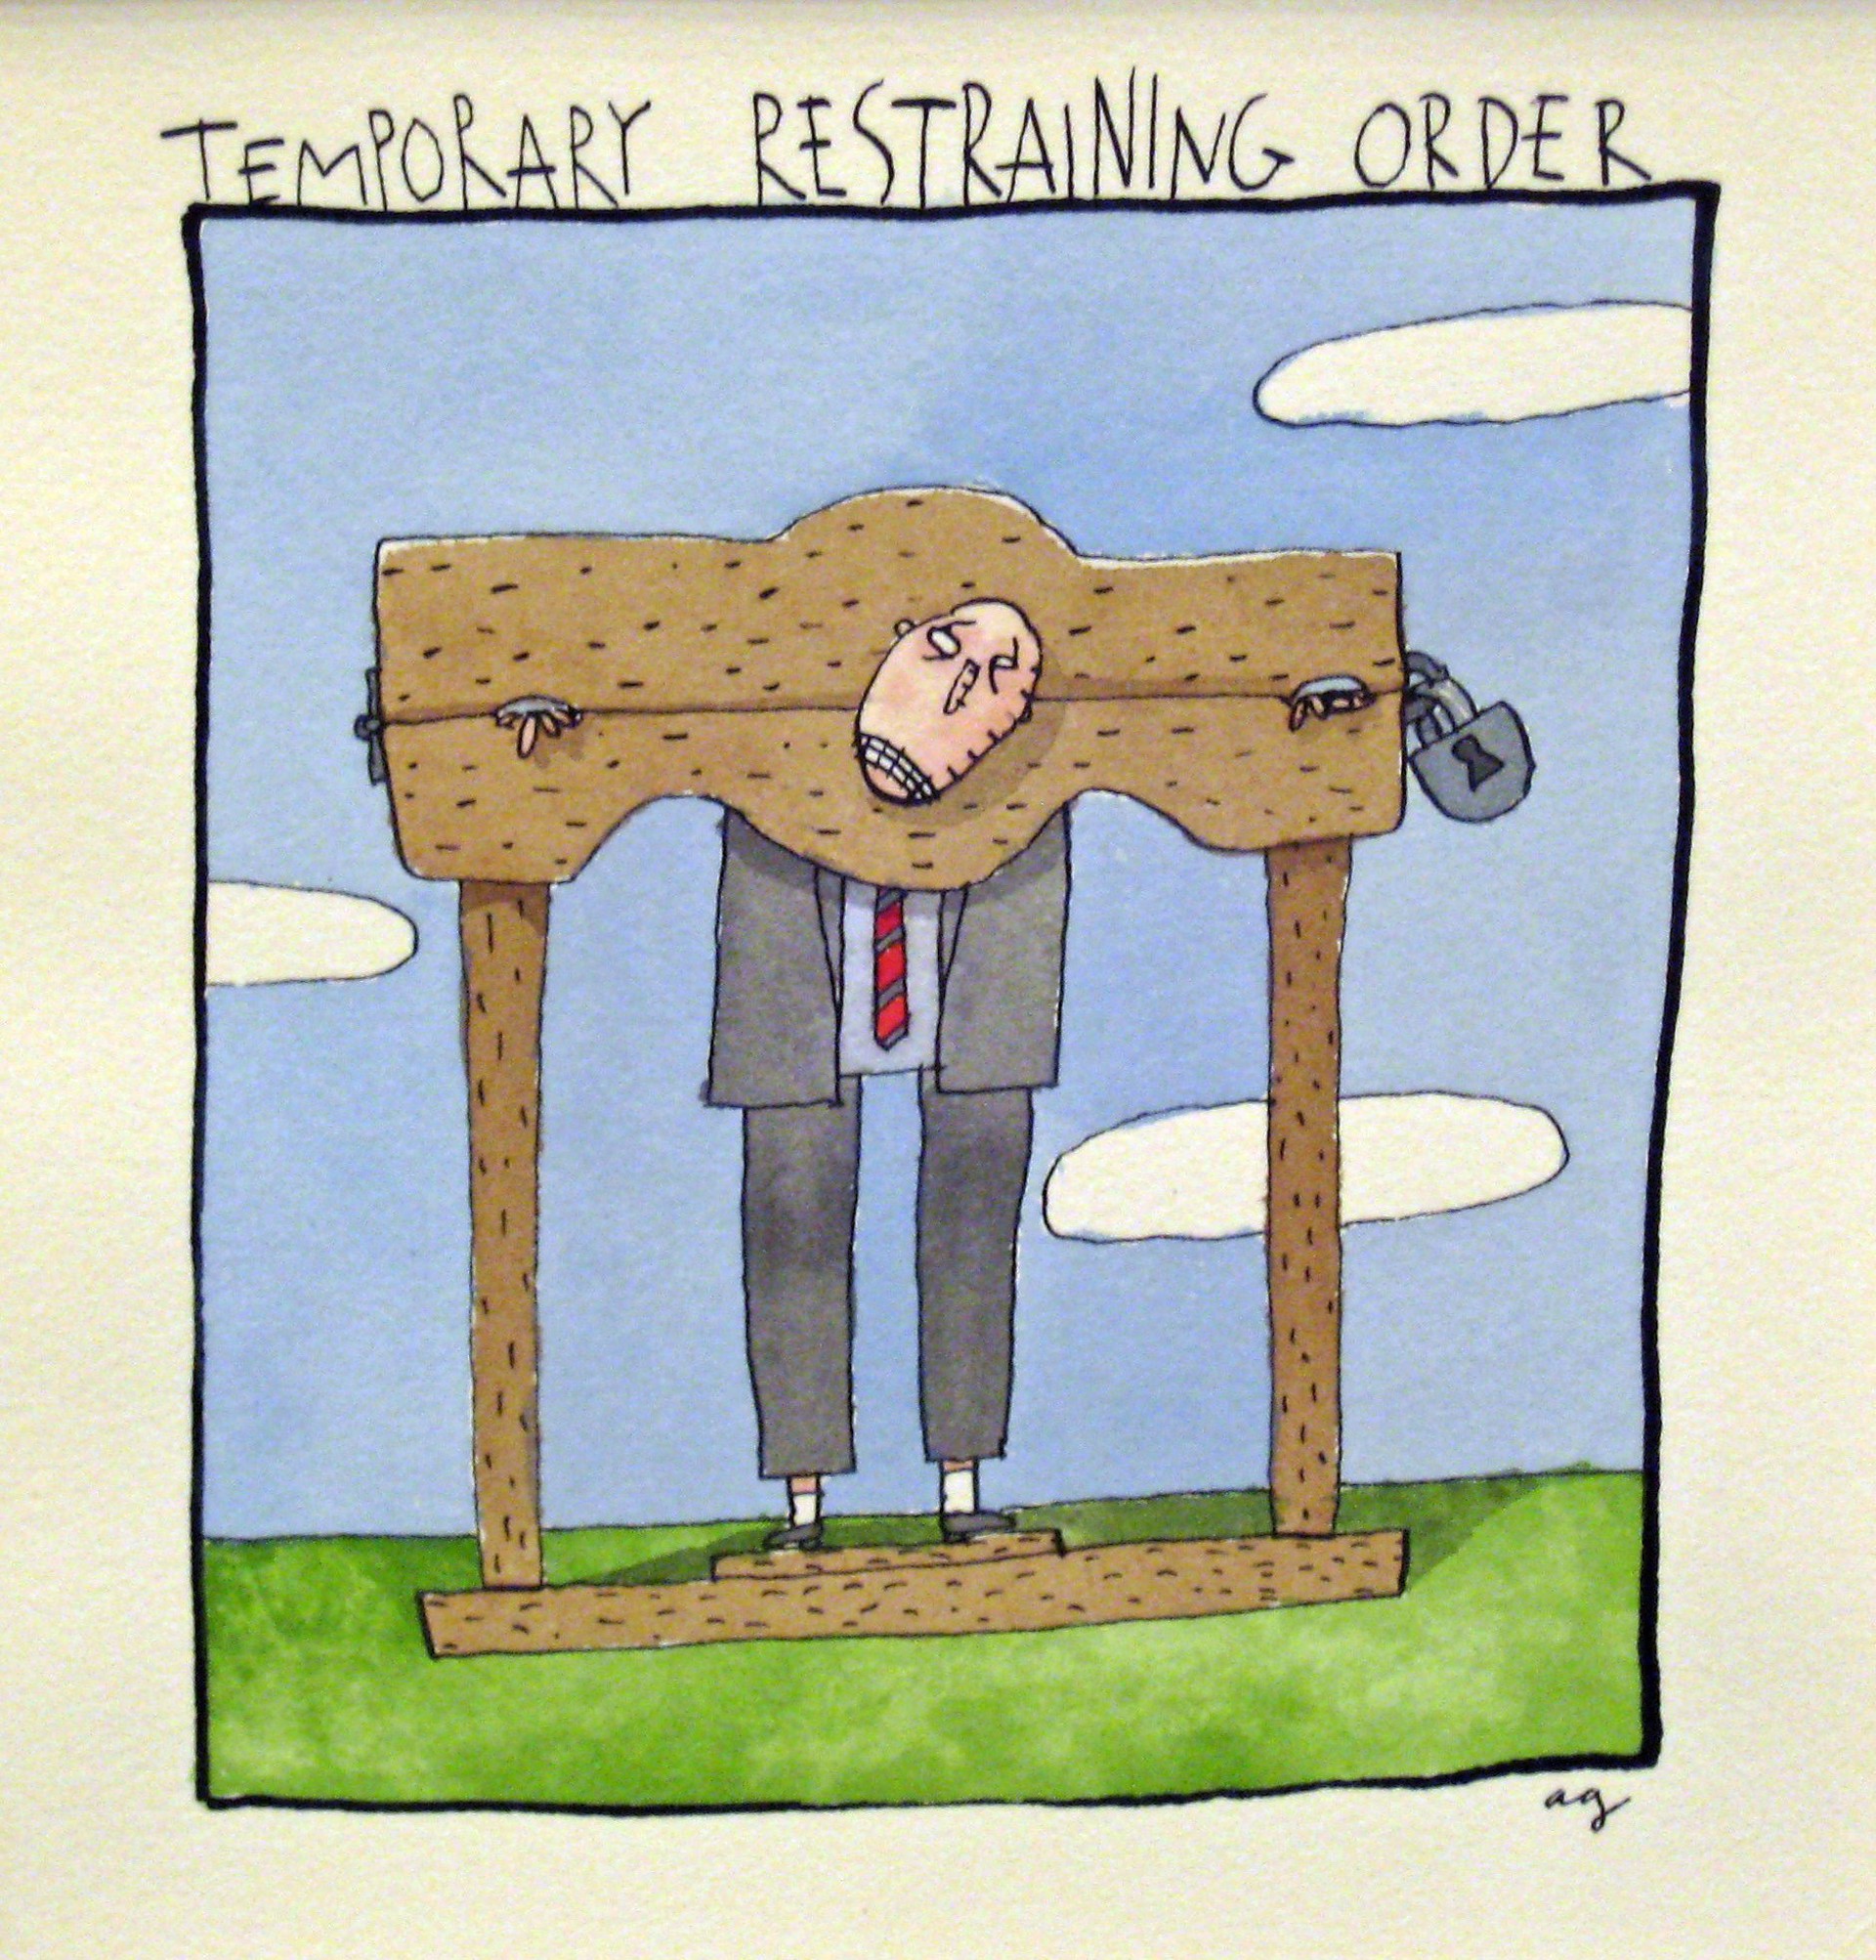 Temporary Restraining Order by Alan Gerson